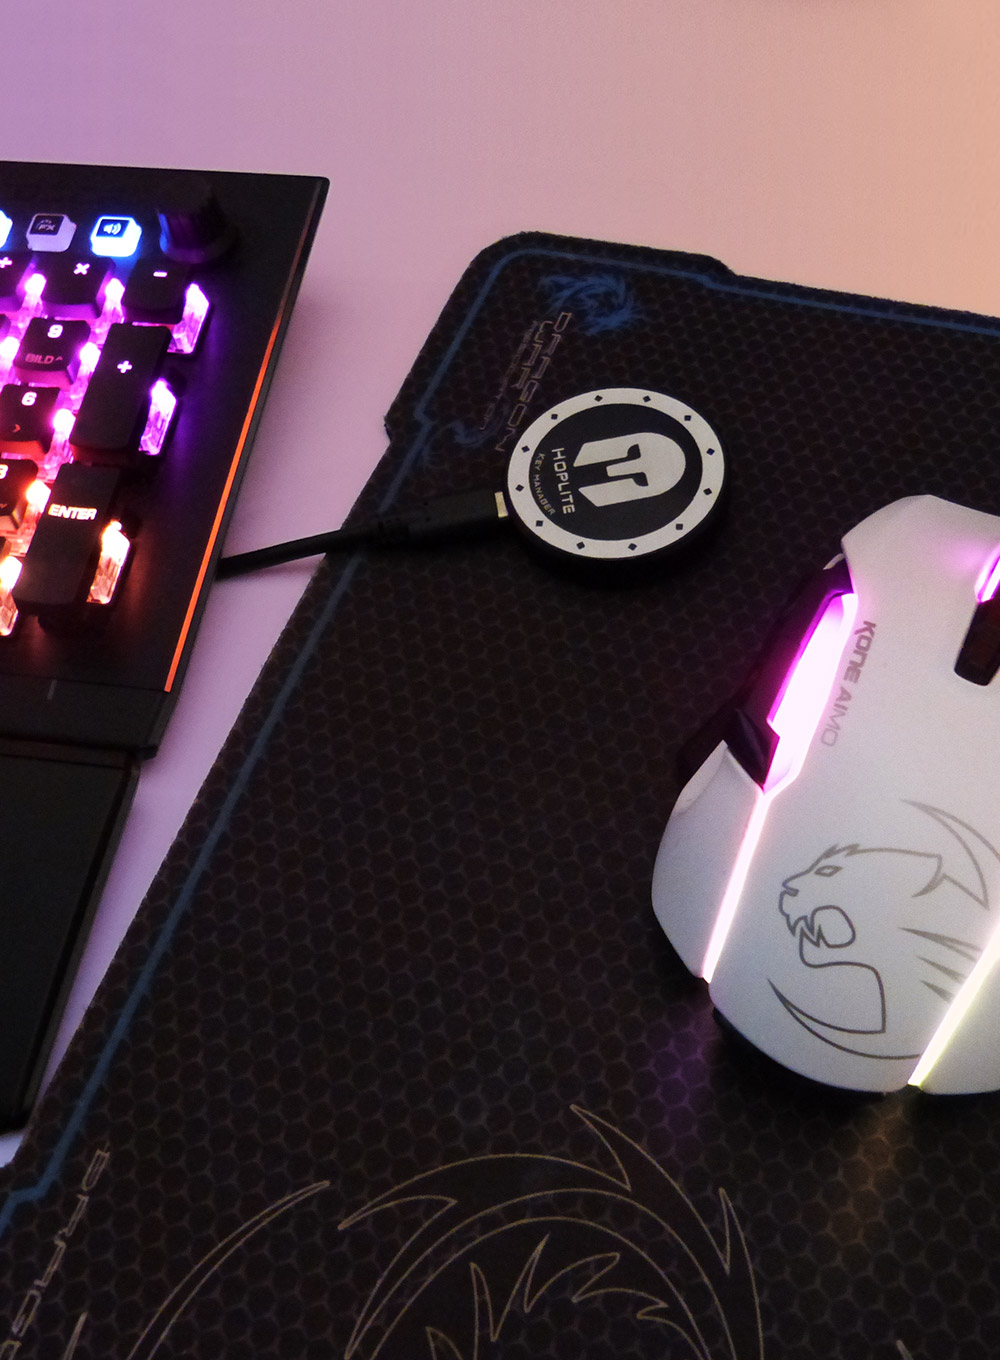 Hoplite - gaming keyboard and mouse